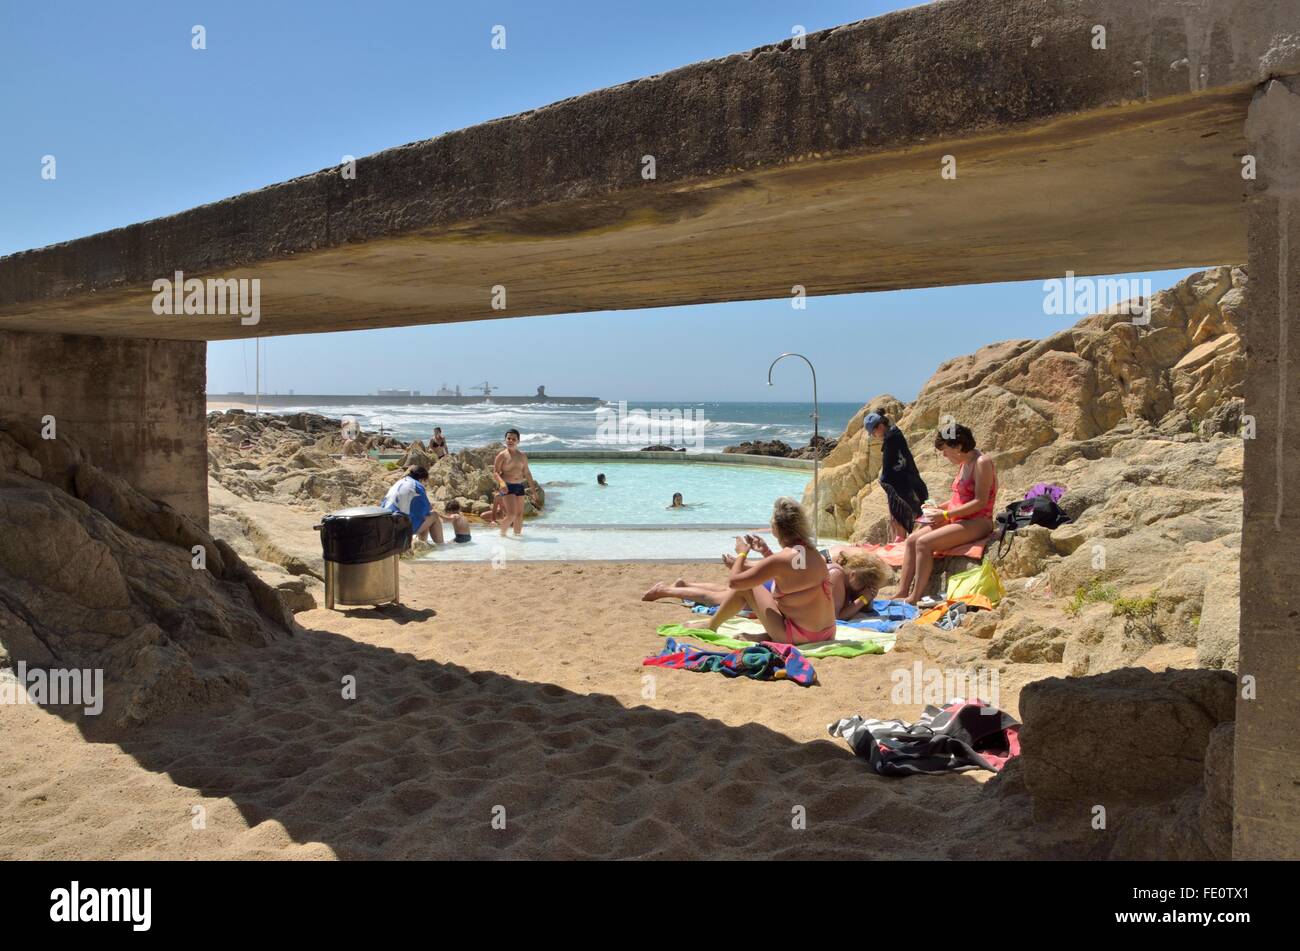 People at the natural swimming pools on the beach of Leca da Palmeira which is located north of the city of Matosinhos, in the d Stock Photo